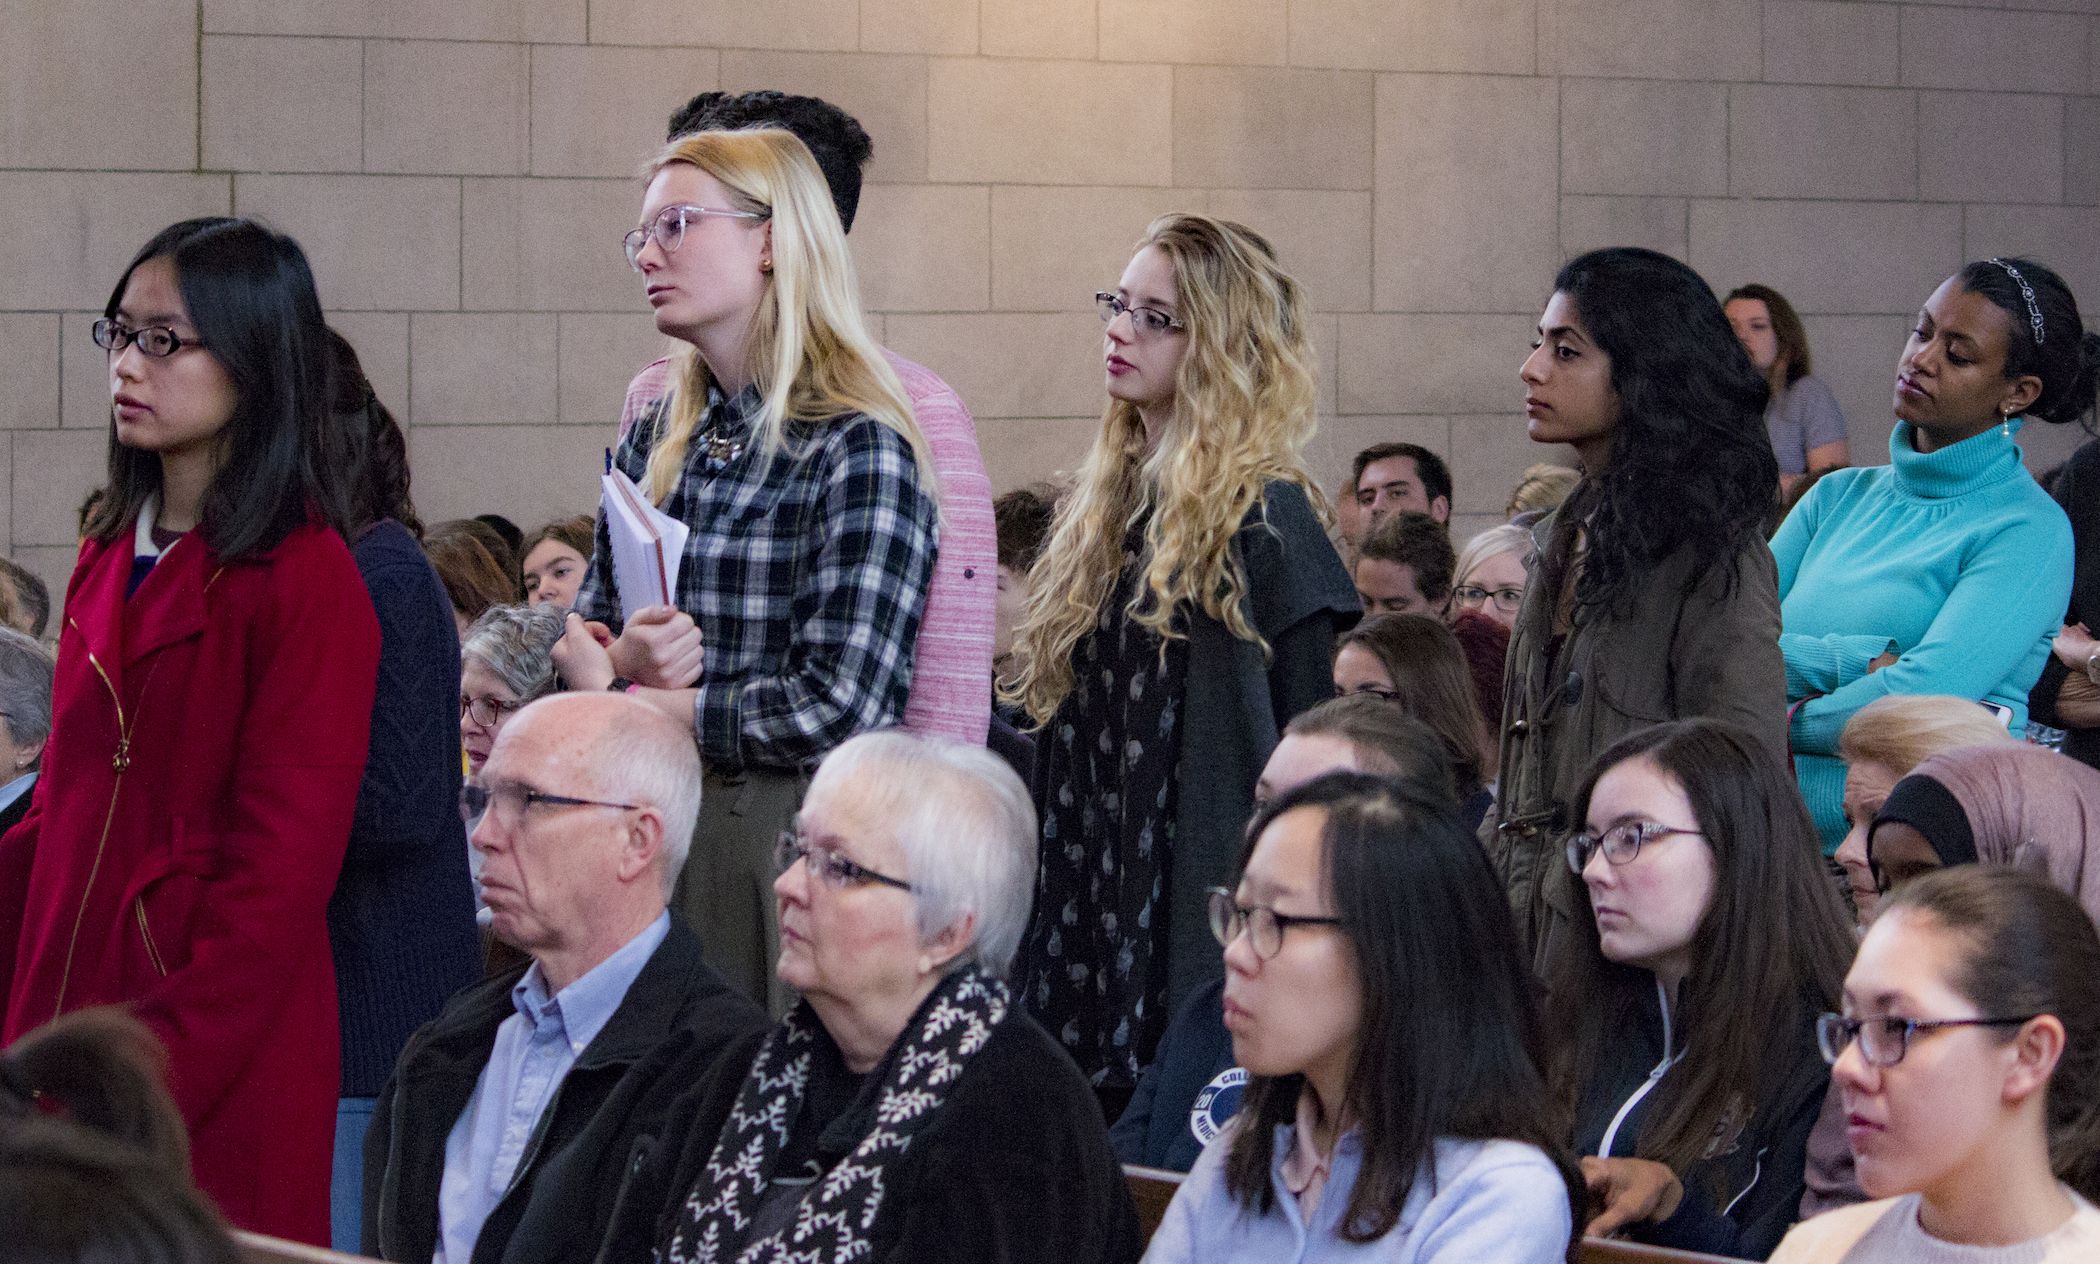 Students at Washington University in St. Louis, wait in line to ask questions of Madeleine Albright and Stephen Hadley. Image by Lauren Shepherd, United States, 2017.